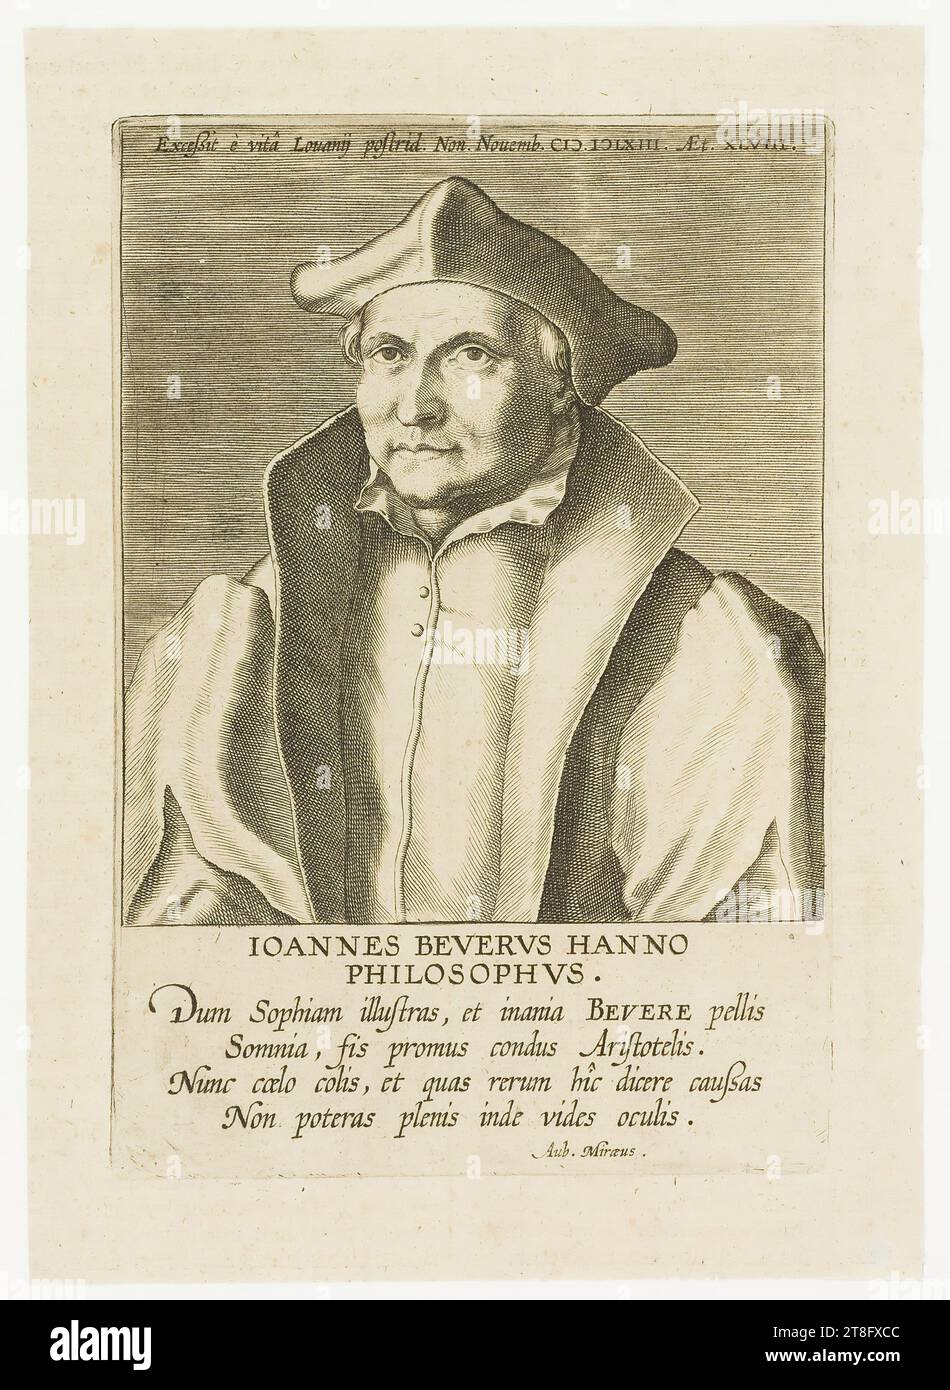 He passed away after the life of Louanij. No. November CIƆ. 163 Eat 48 IOANNES BEVERVUS HANNO PHILOSOPHVS., While you enlighten Sophia, and empty BEVERE's skin, Dreams, you become the first to lead Aristotle. Amazing. illustration from: Foppens, Bibliotheca Belgica, Brussels 1739; vol.1 580-581 Stock Photo